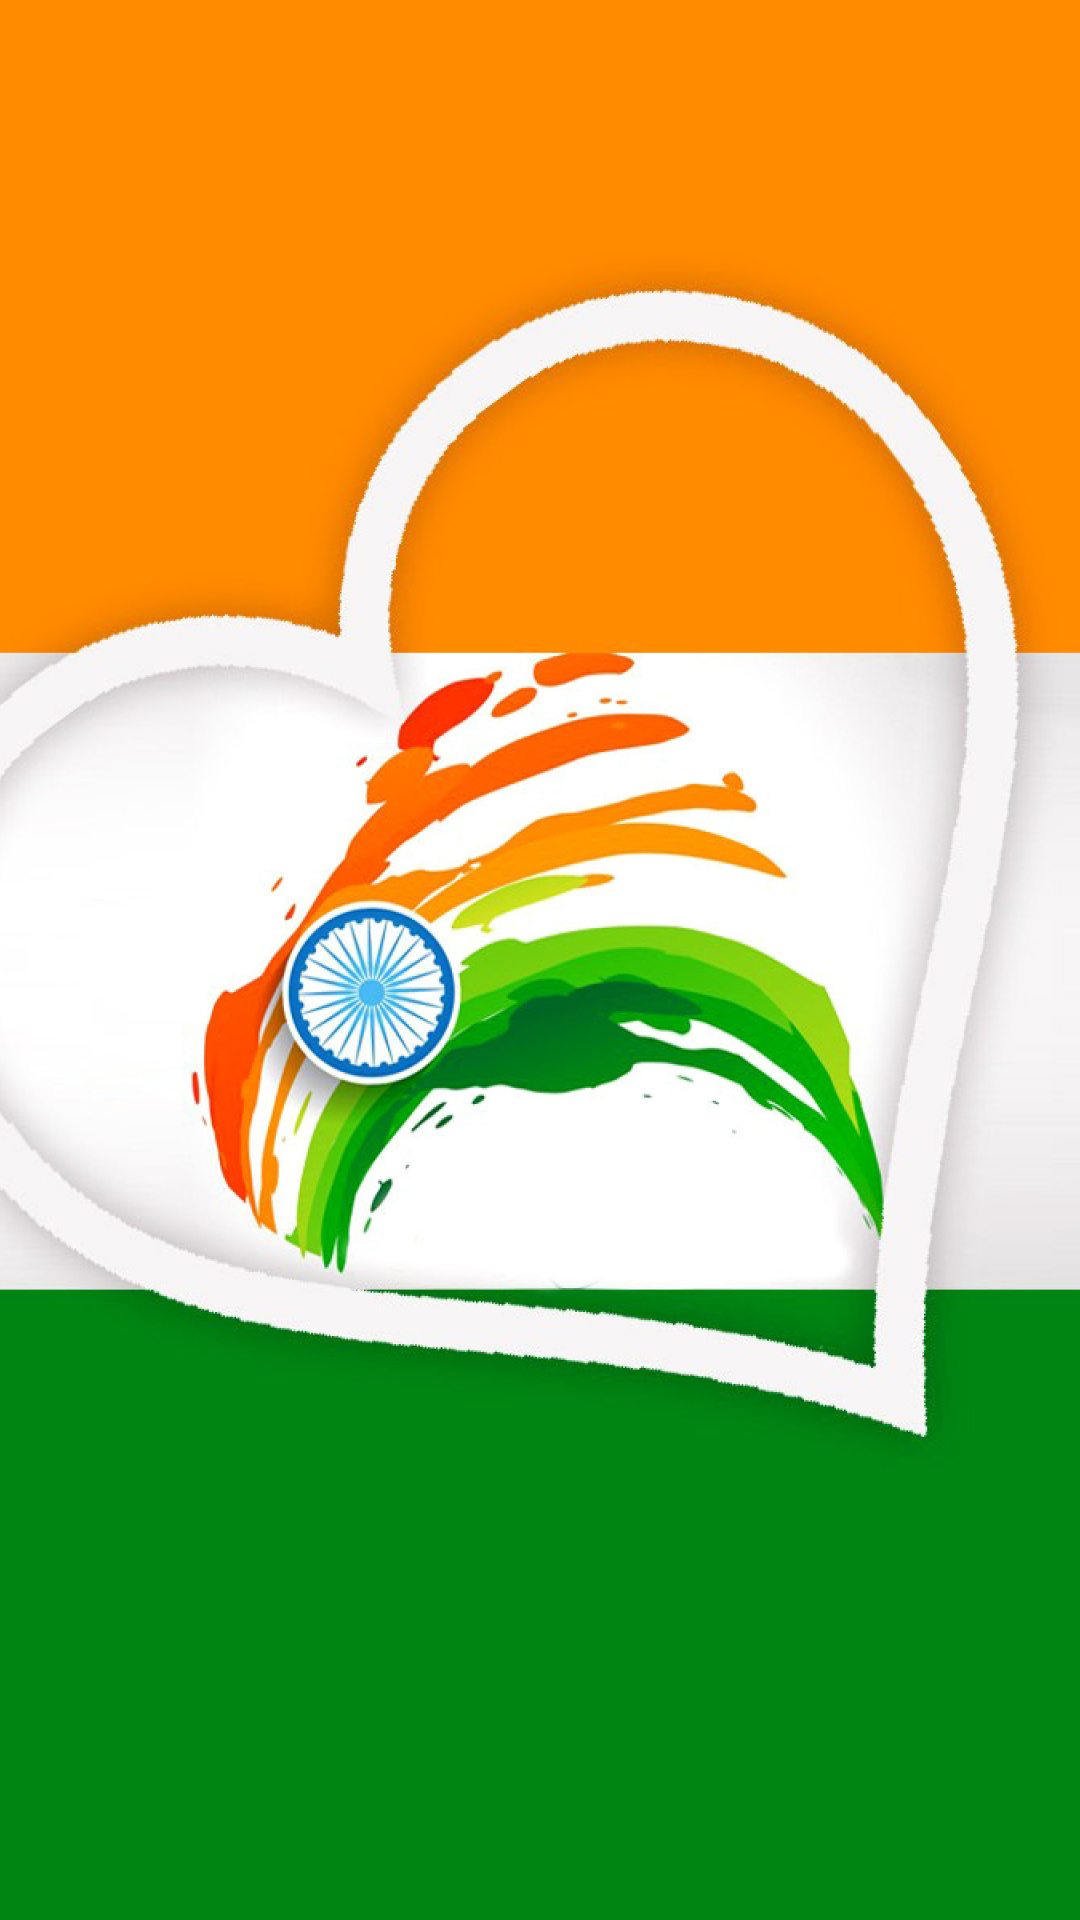 Happy Independence Day of India Flag screenshot #1 1080x1920